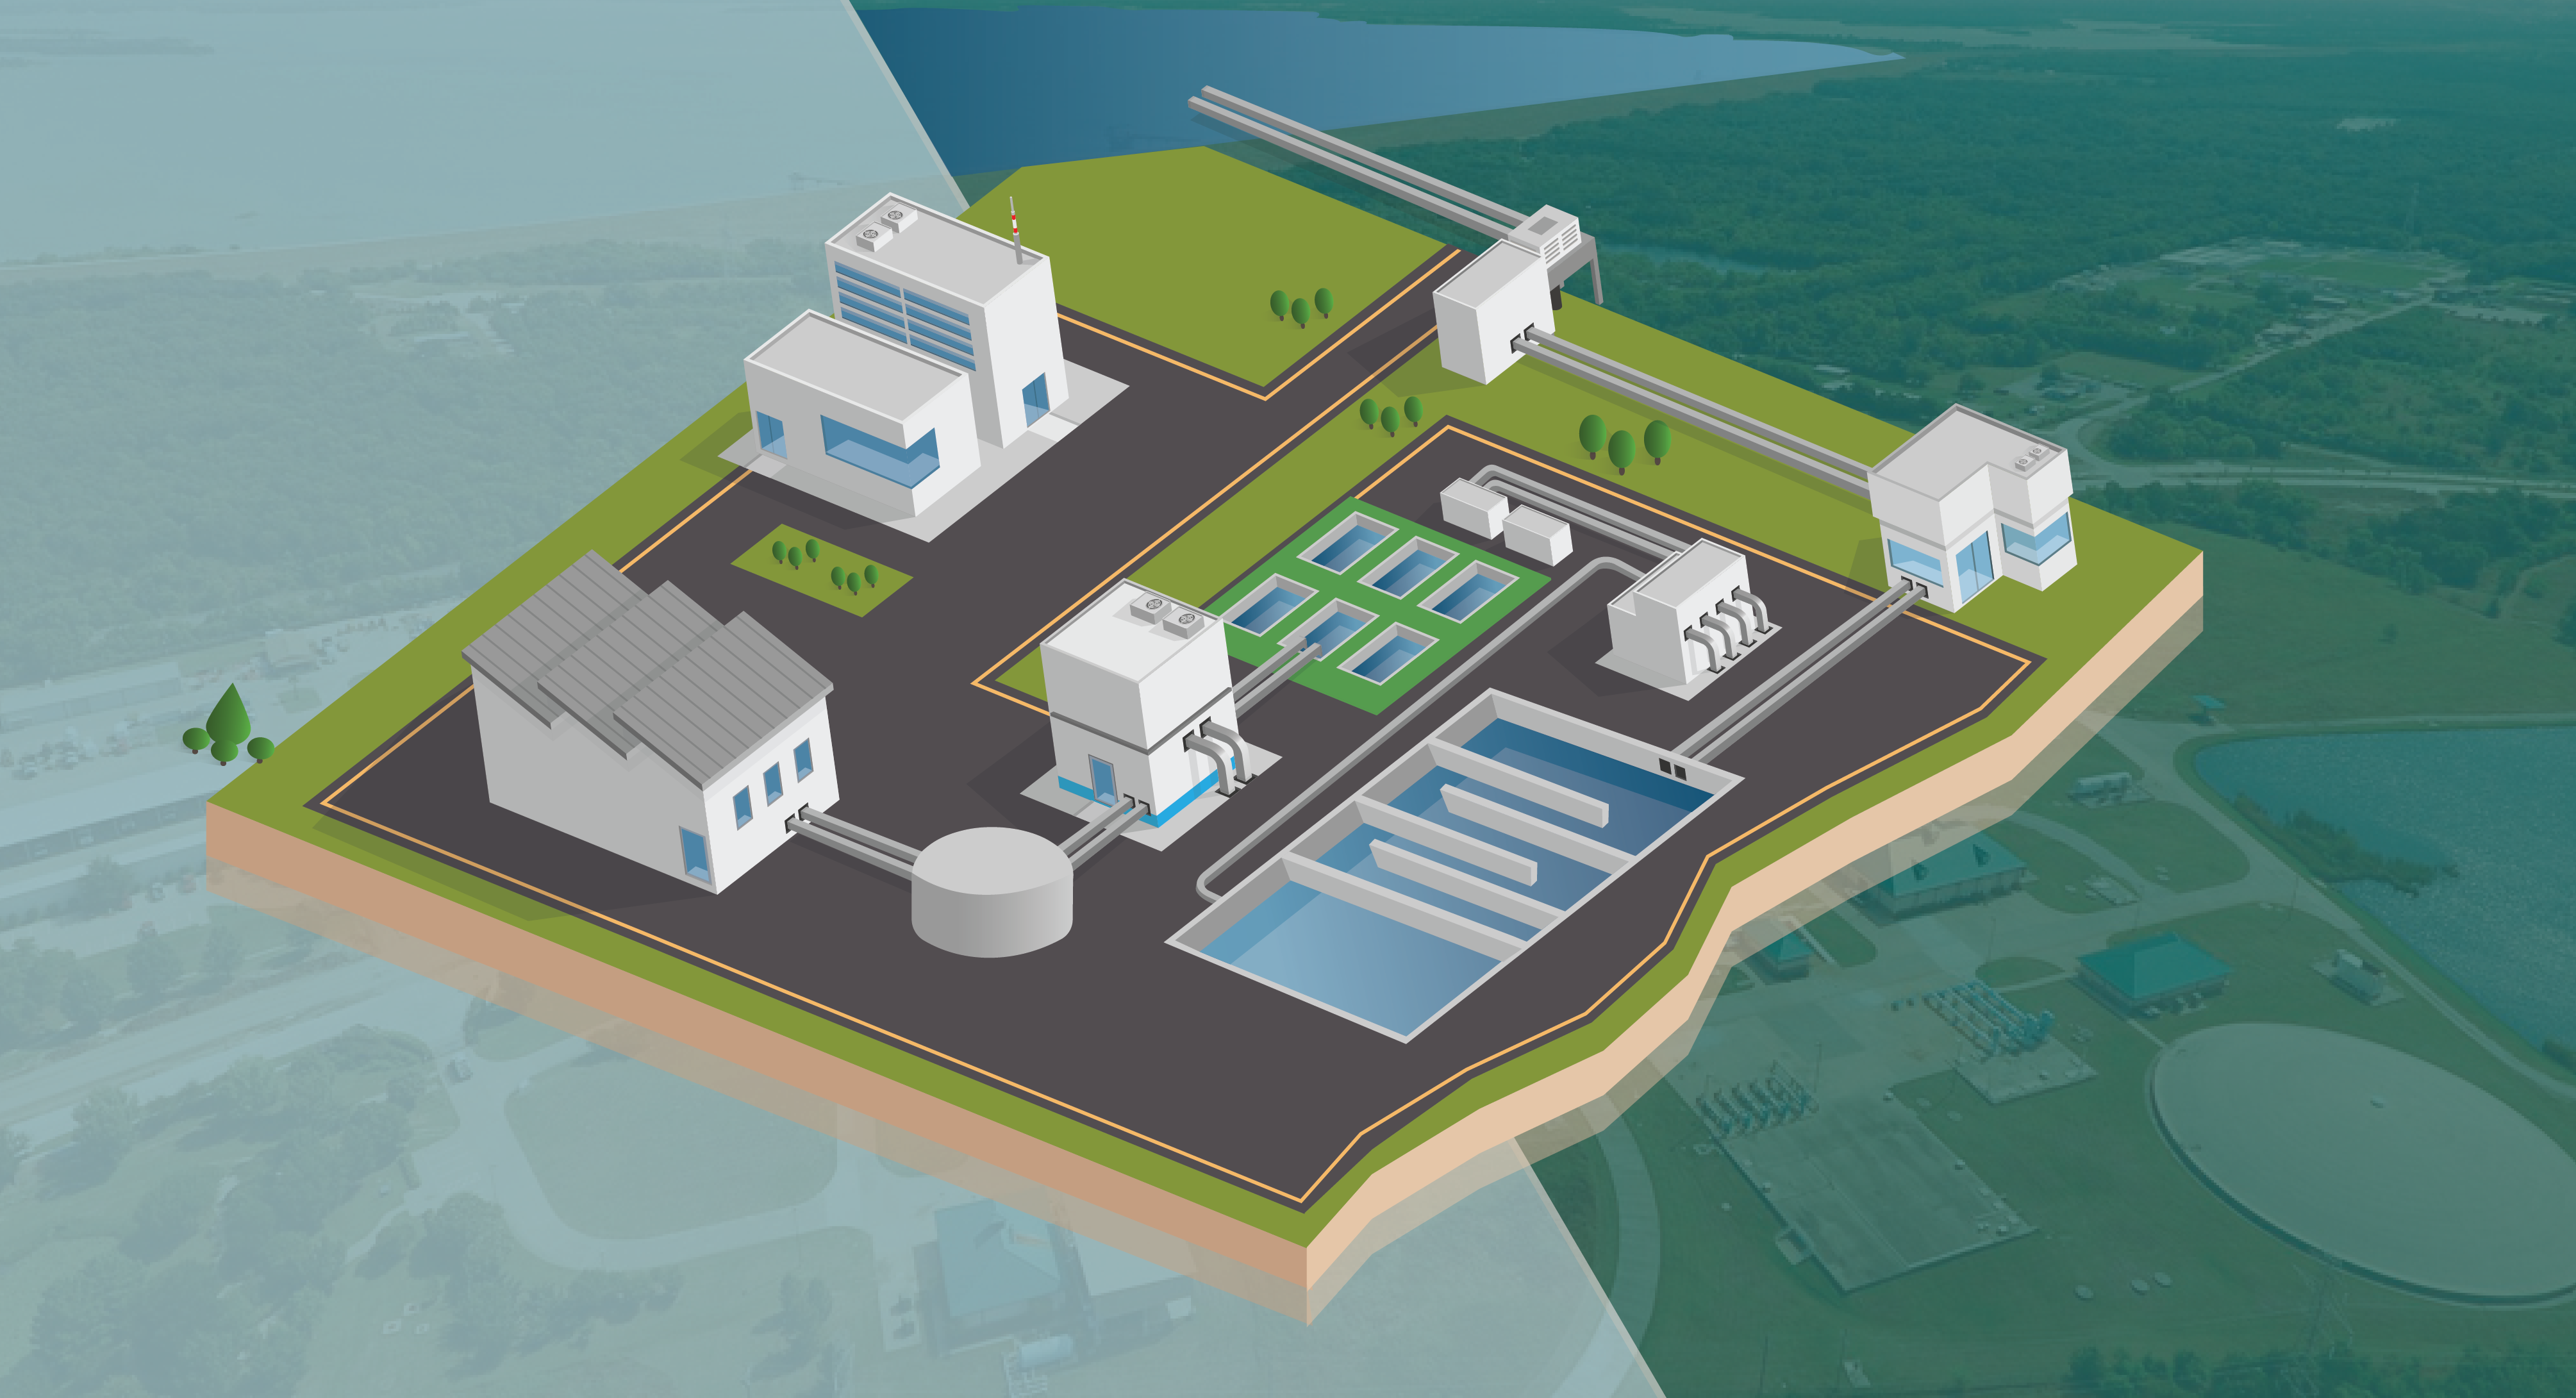 infographic depicting the water treatment plant from above